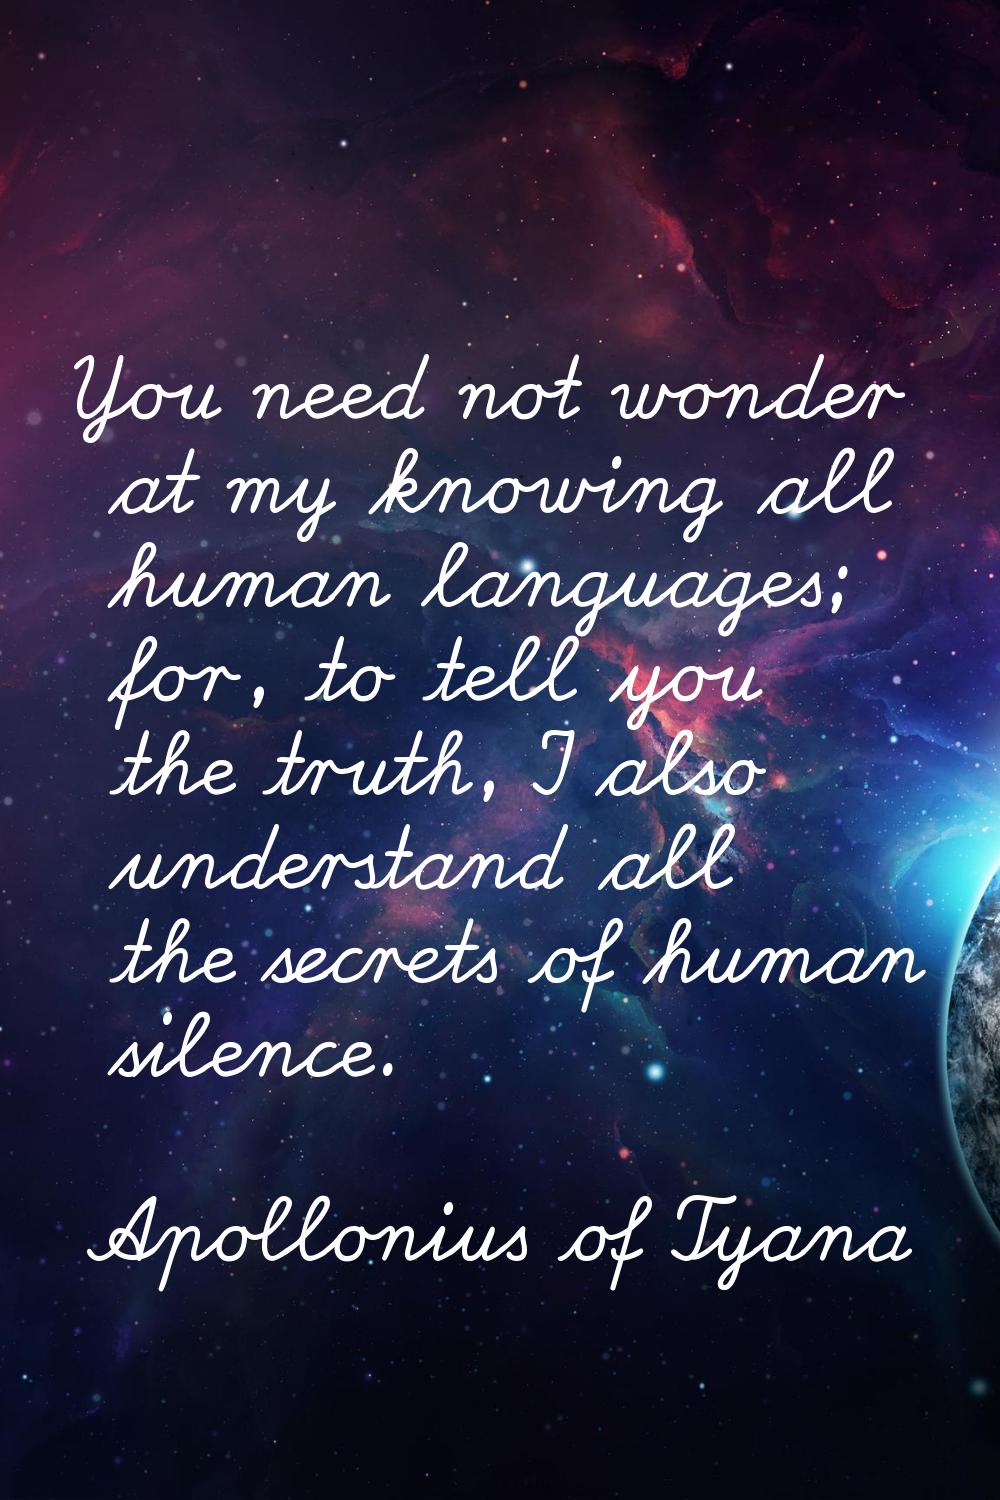 You need not wonder at my knowing all human languages; for, to tell you the truth, I also understan